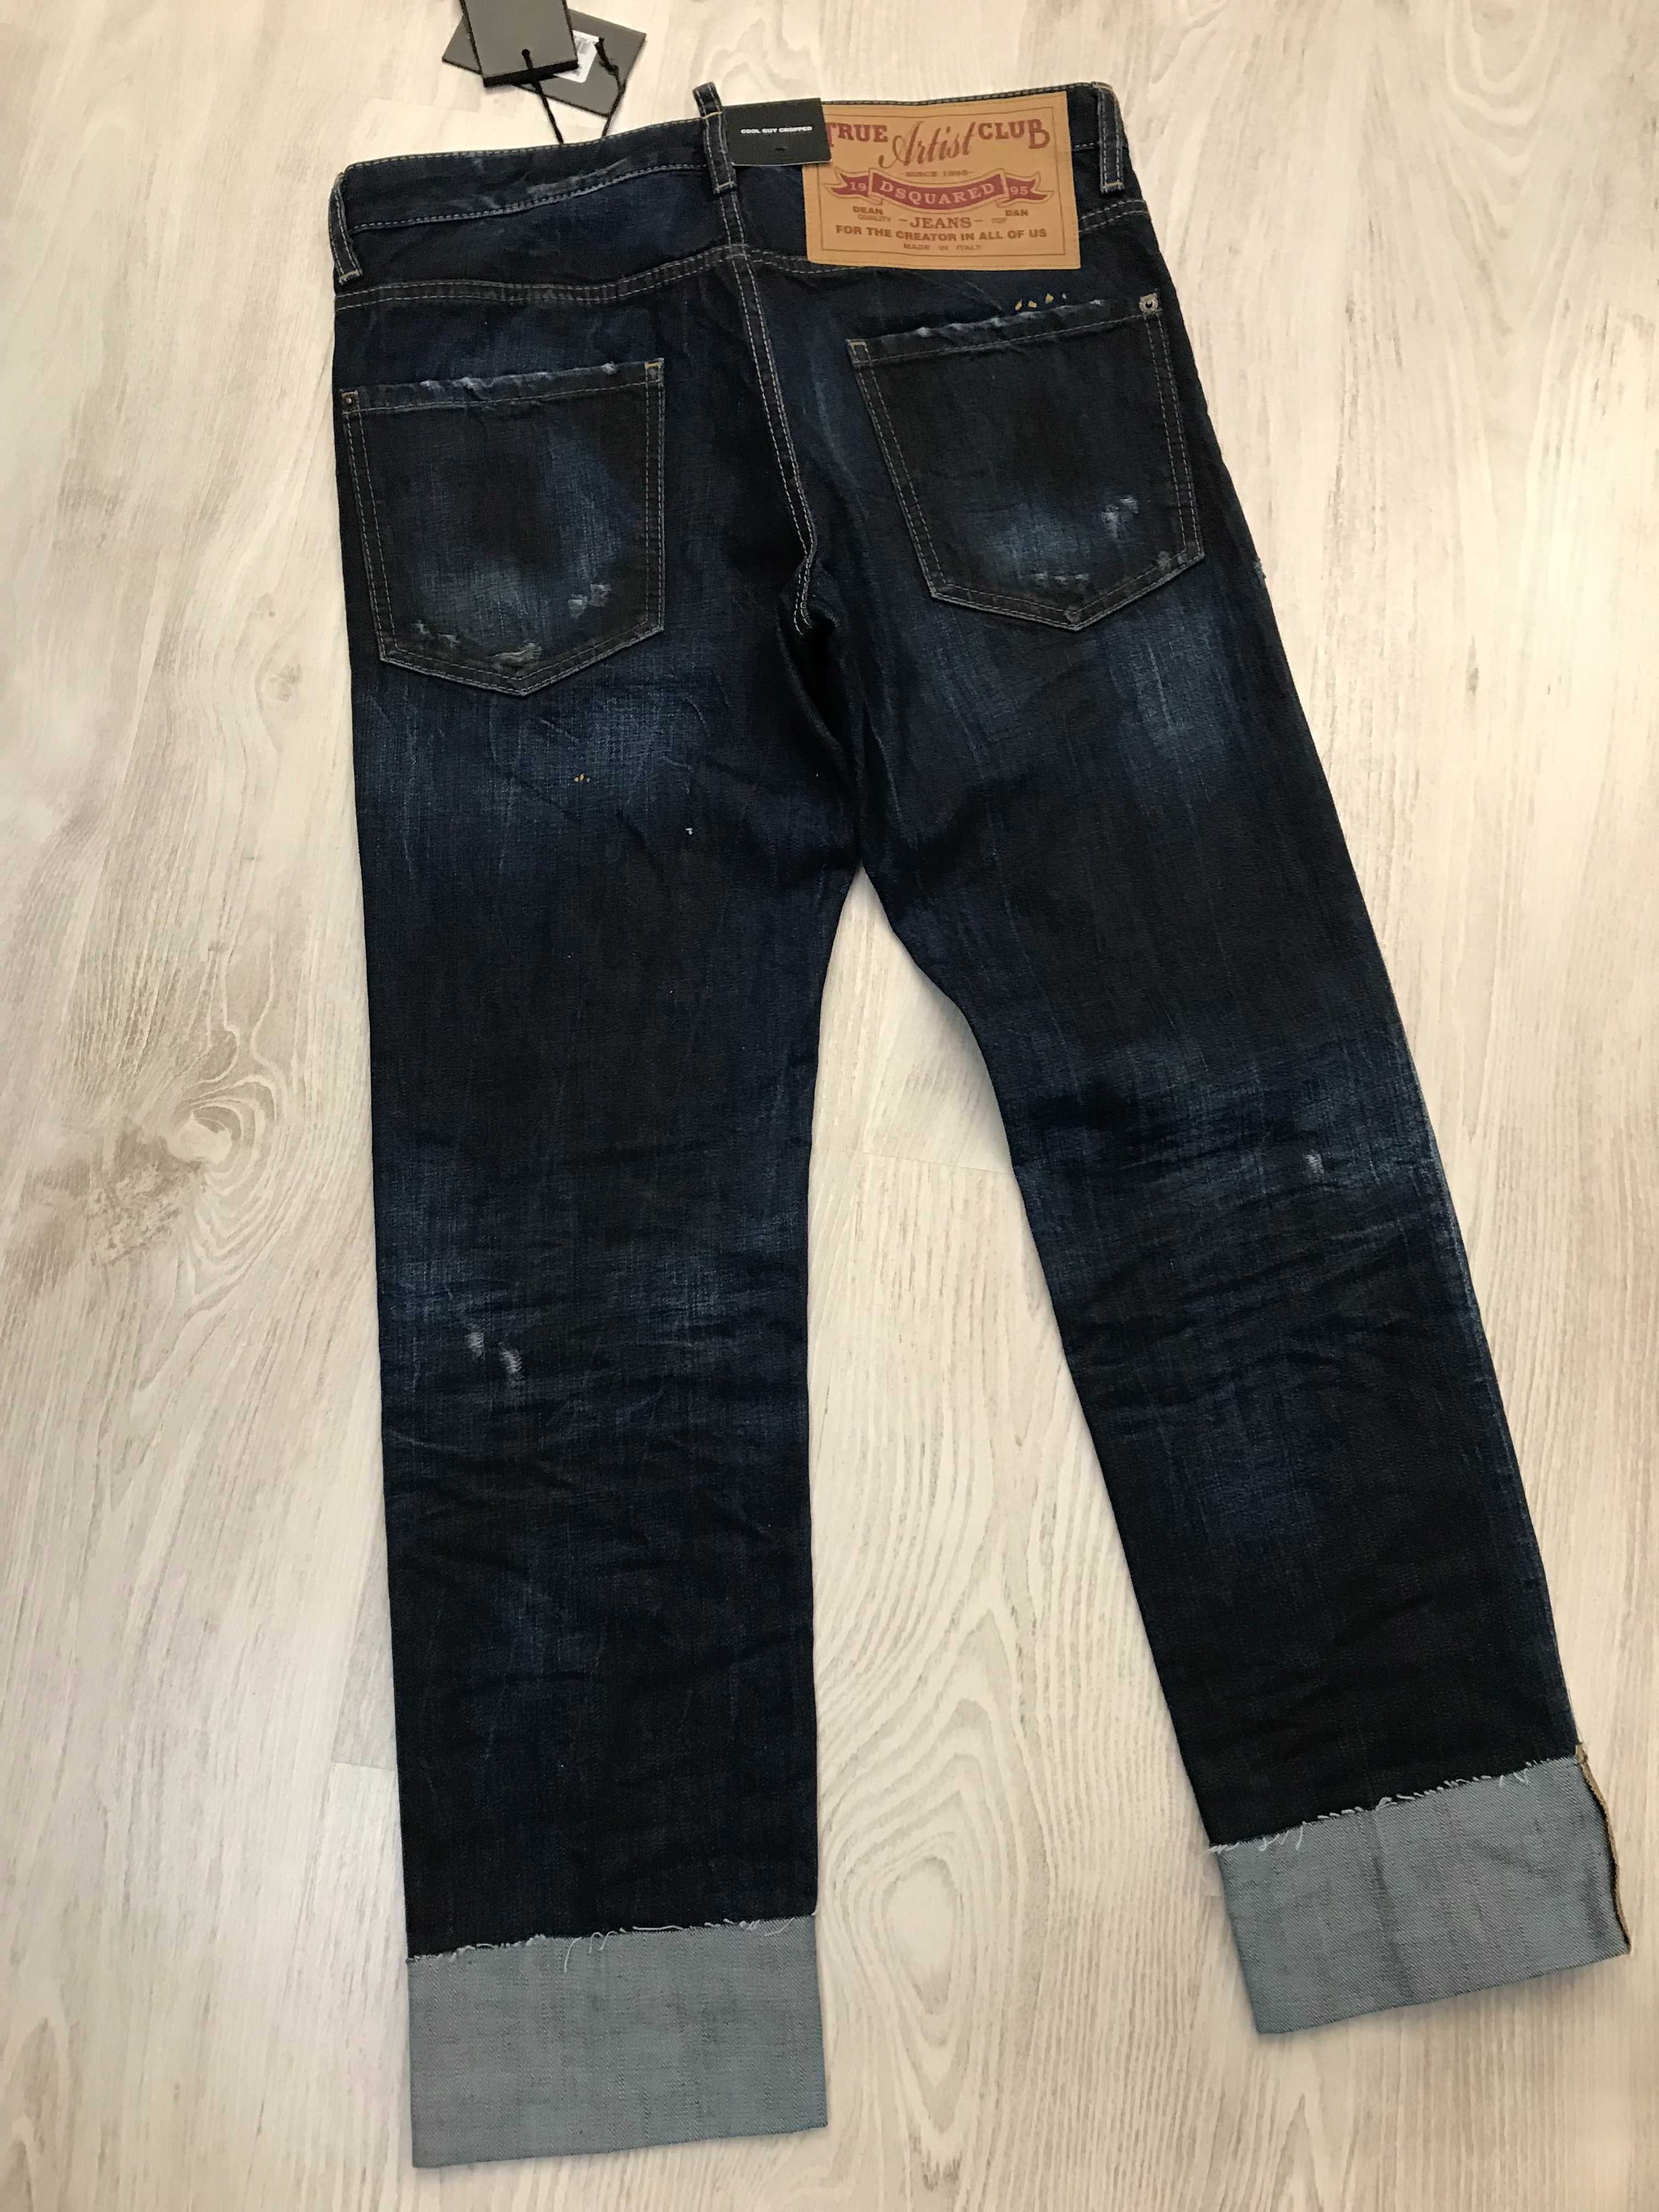 Dsquared2 blugi Cool Guy Cropped 46-48 italy, S-M, retail 558 euro